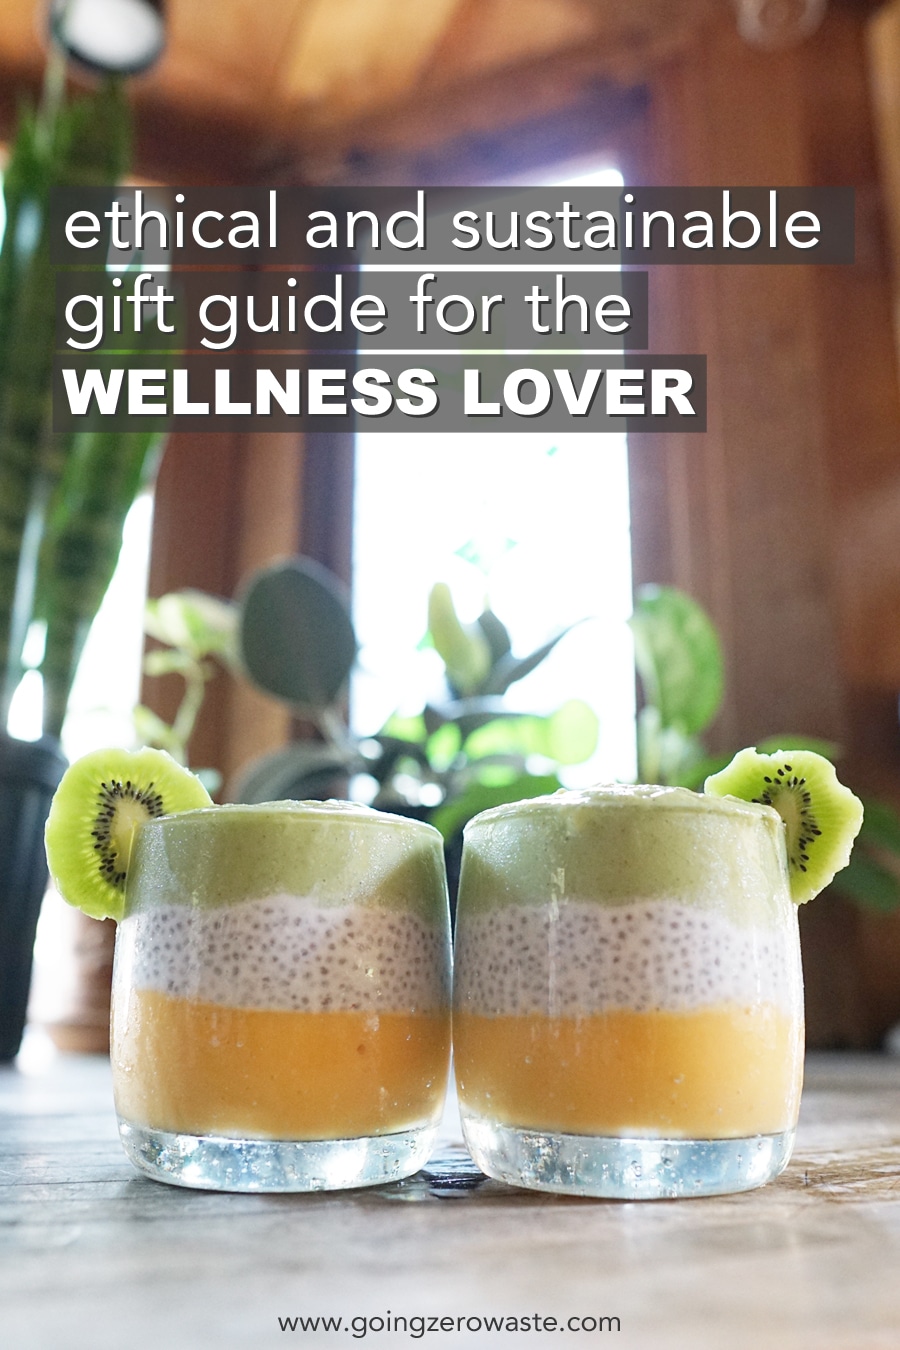 Ethical and Sustainable Gift Guide for the Wellness Lover from www.goingzerowaste.com #zerowaste #ecofriendly #gogreen #sustainable 
